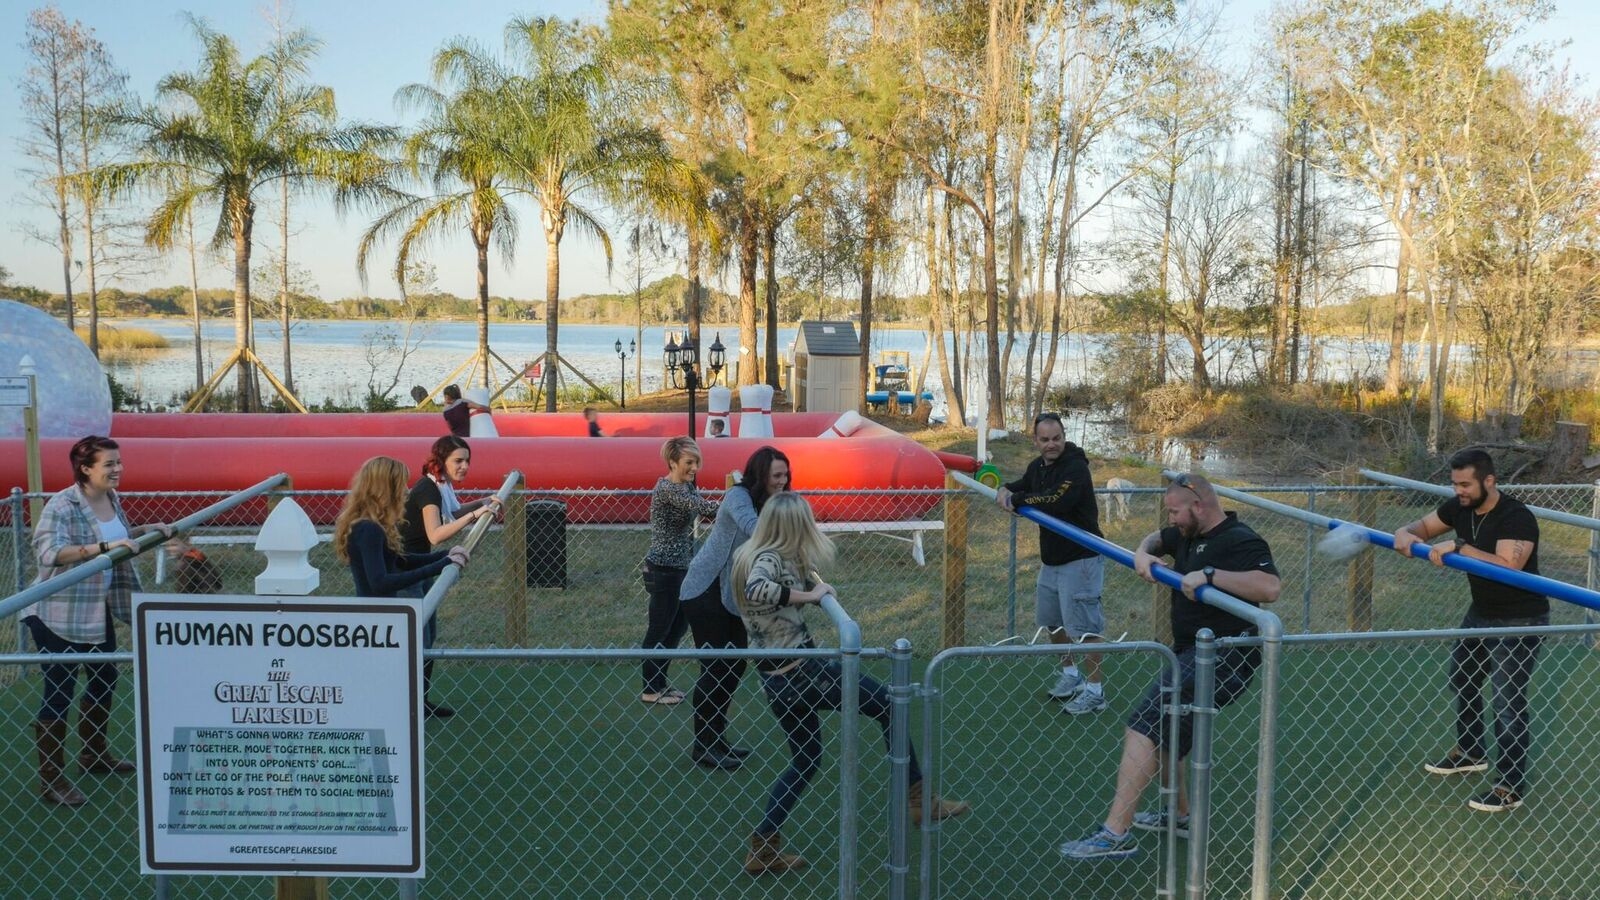 People playing human foosball at The Great Escape Lakeside